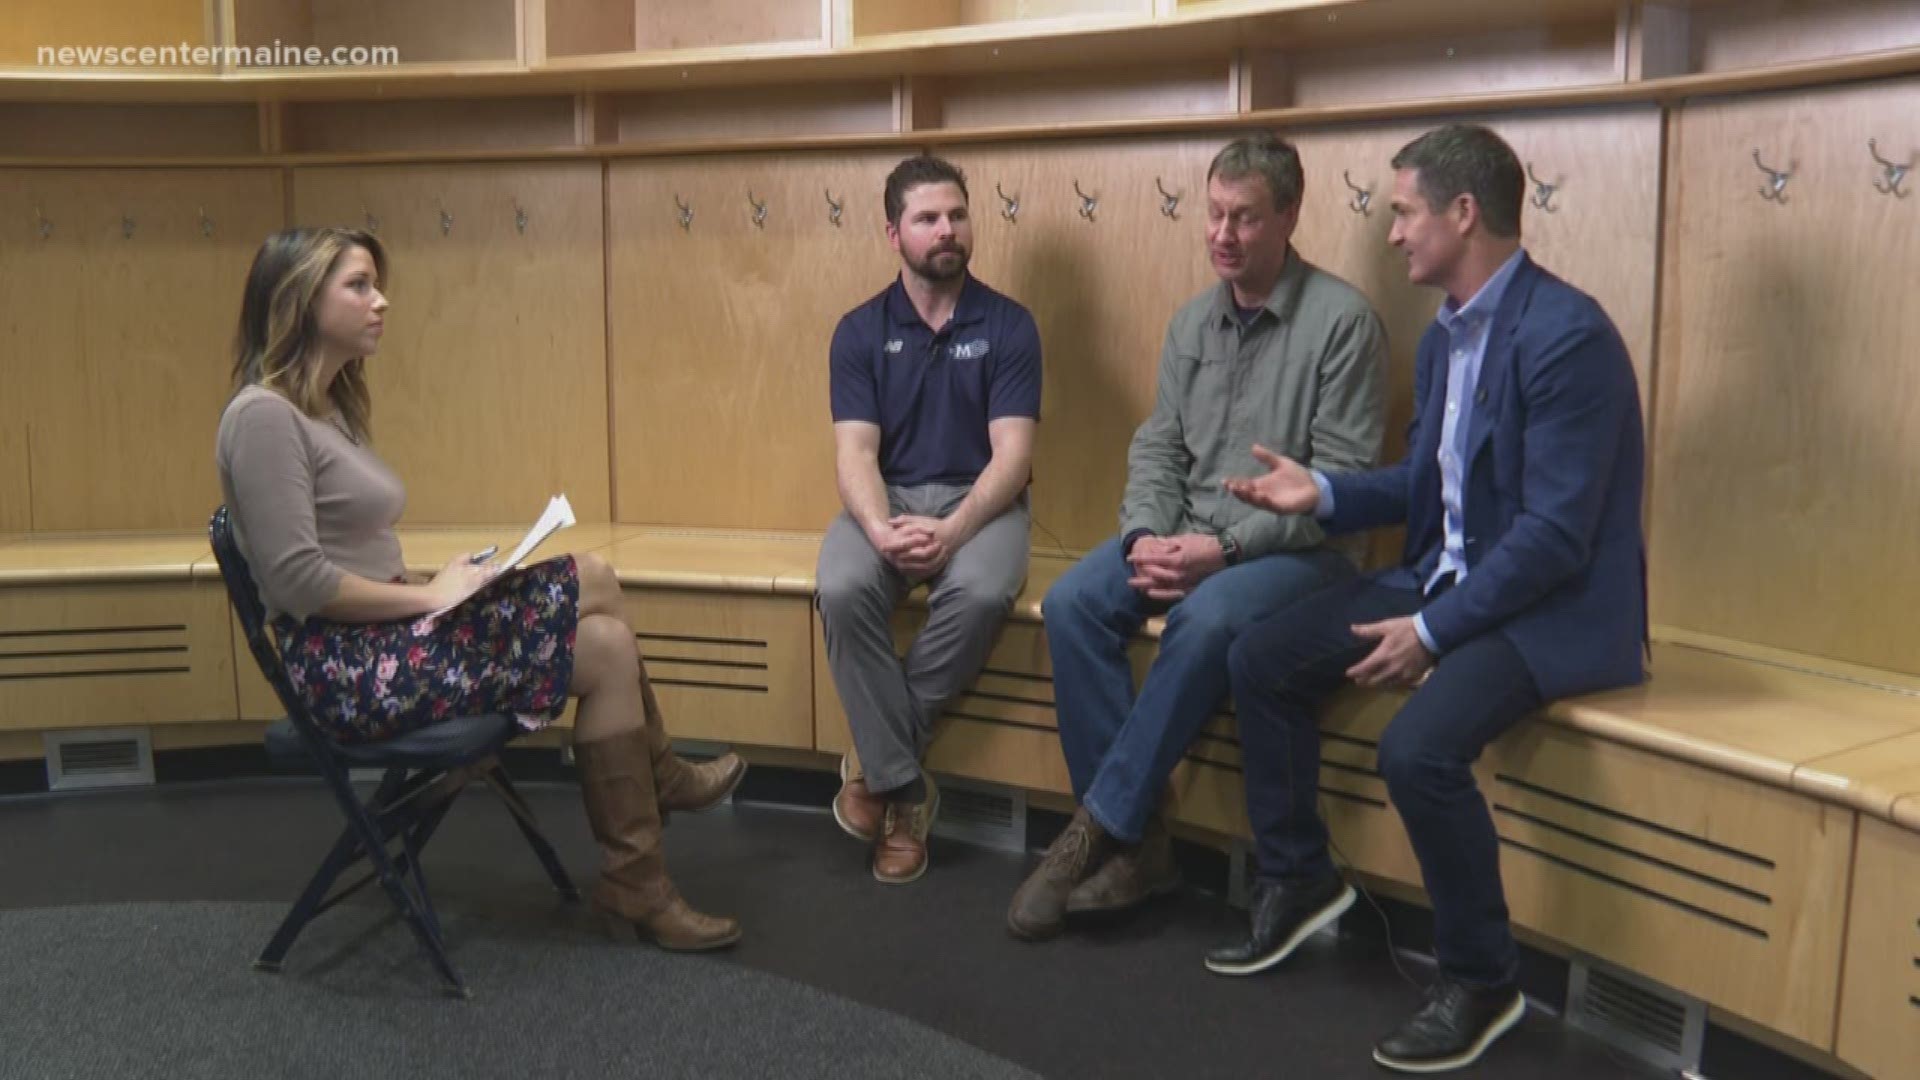 We sat down with the three guys behind the new series to talk hockey, home renovations, and the making of a team.